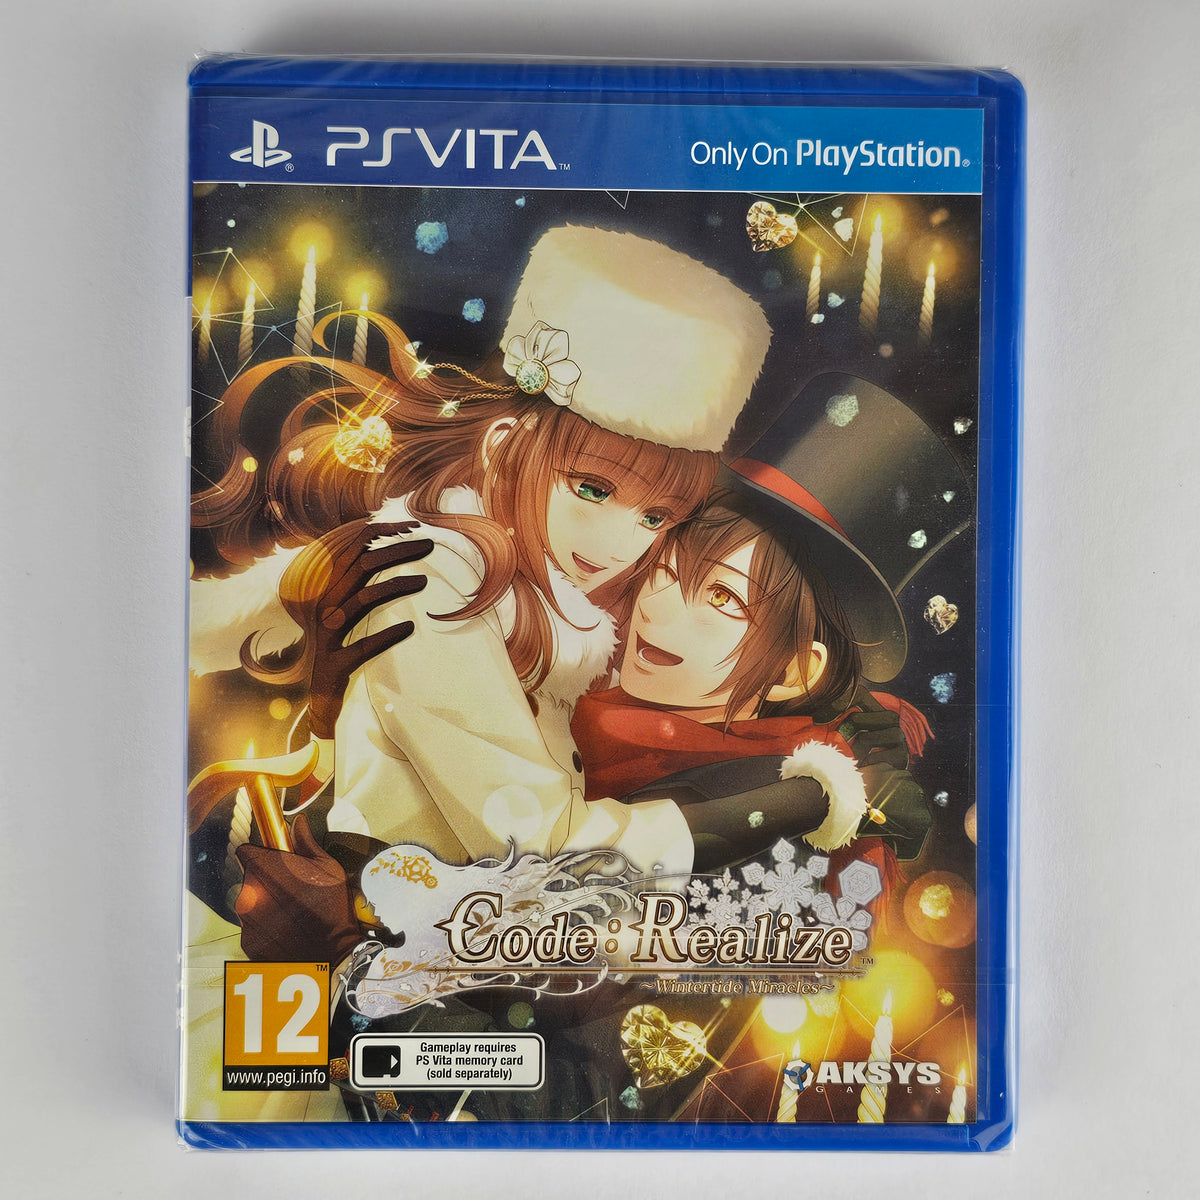 Code: Realize Wintertide Miracles [PSV]